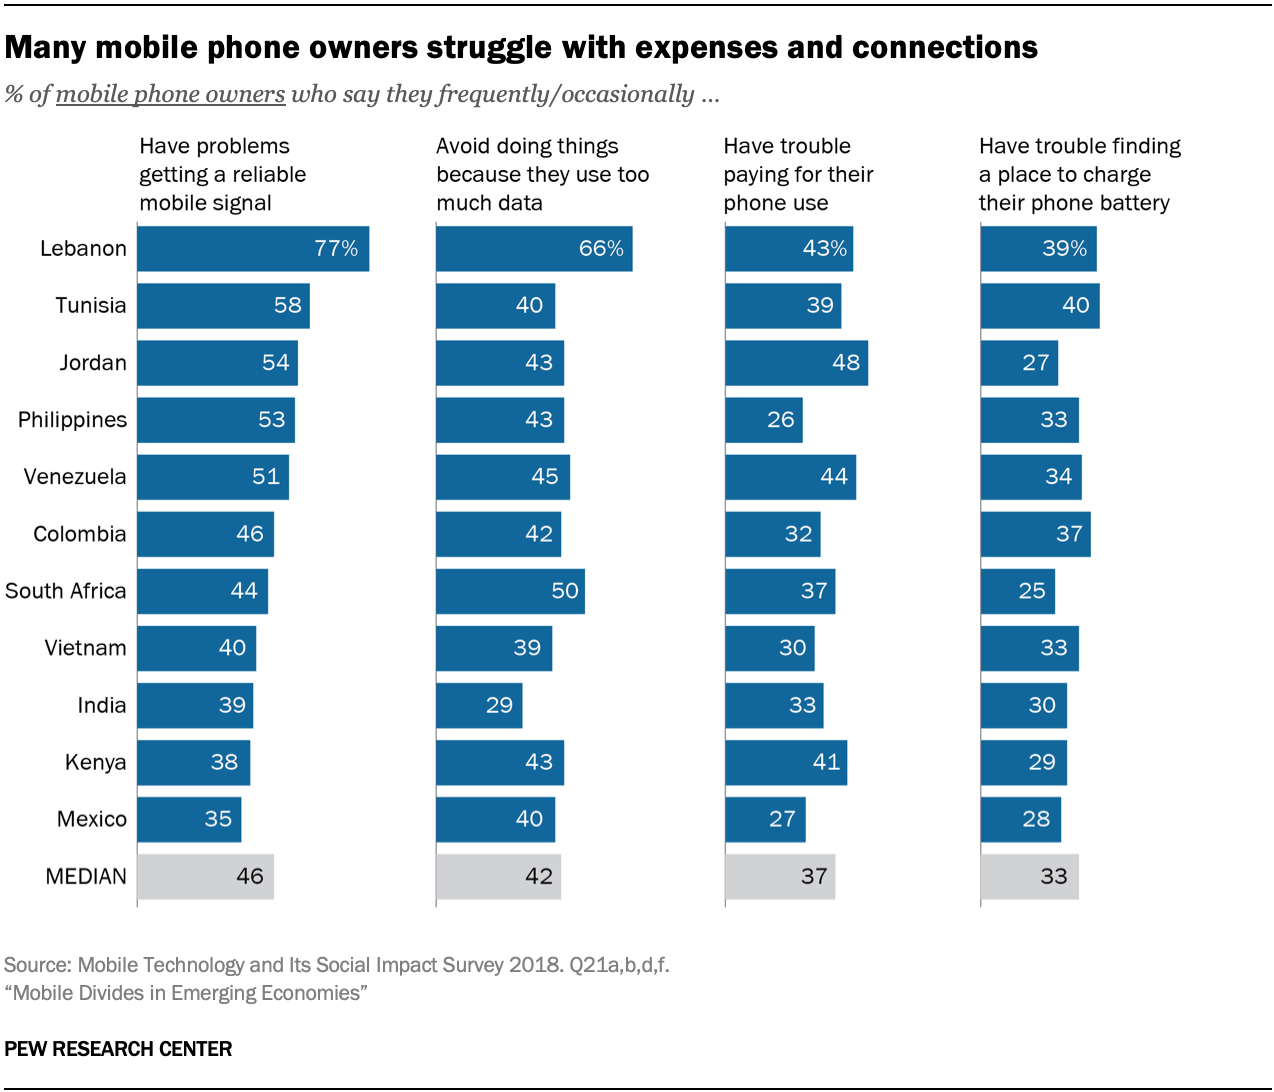 Many mobile phone owners struggle with expenses and connections